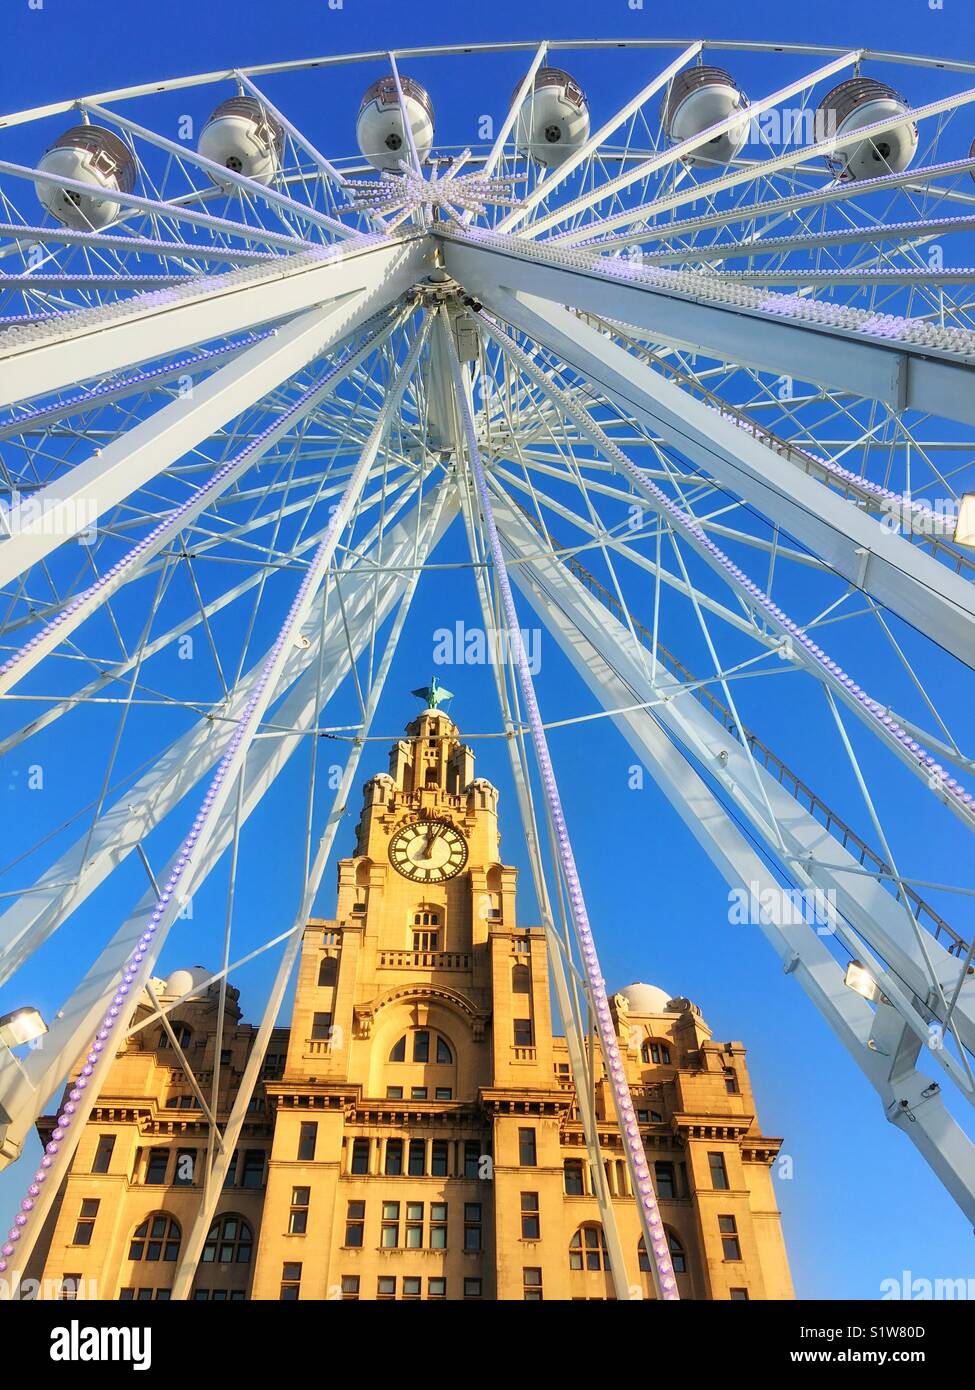 Royal Liver Building in Liverpool seen through a giant Ferris wheel against a blue sky Stock Photo